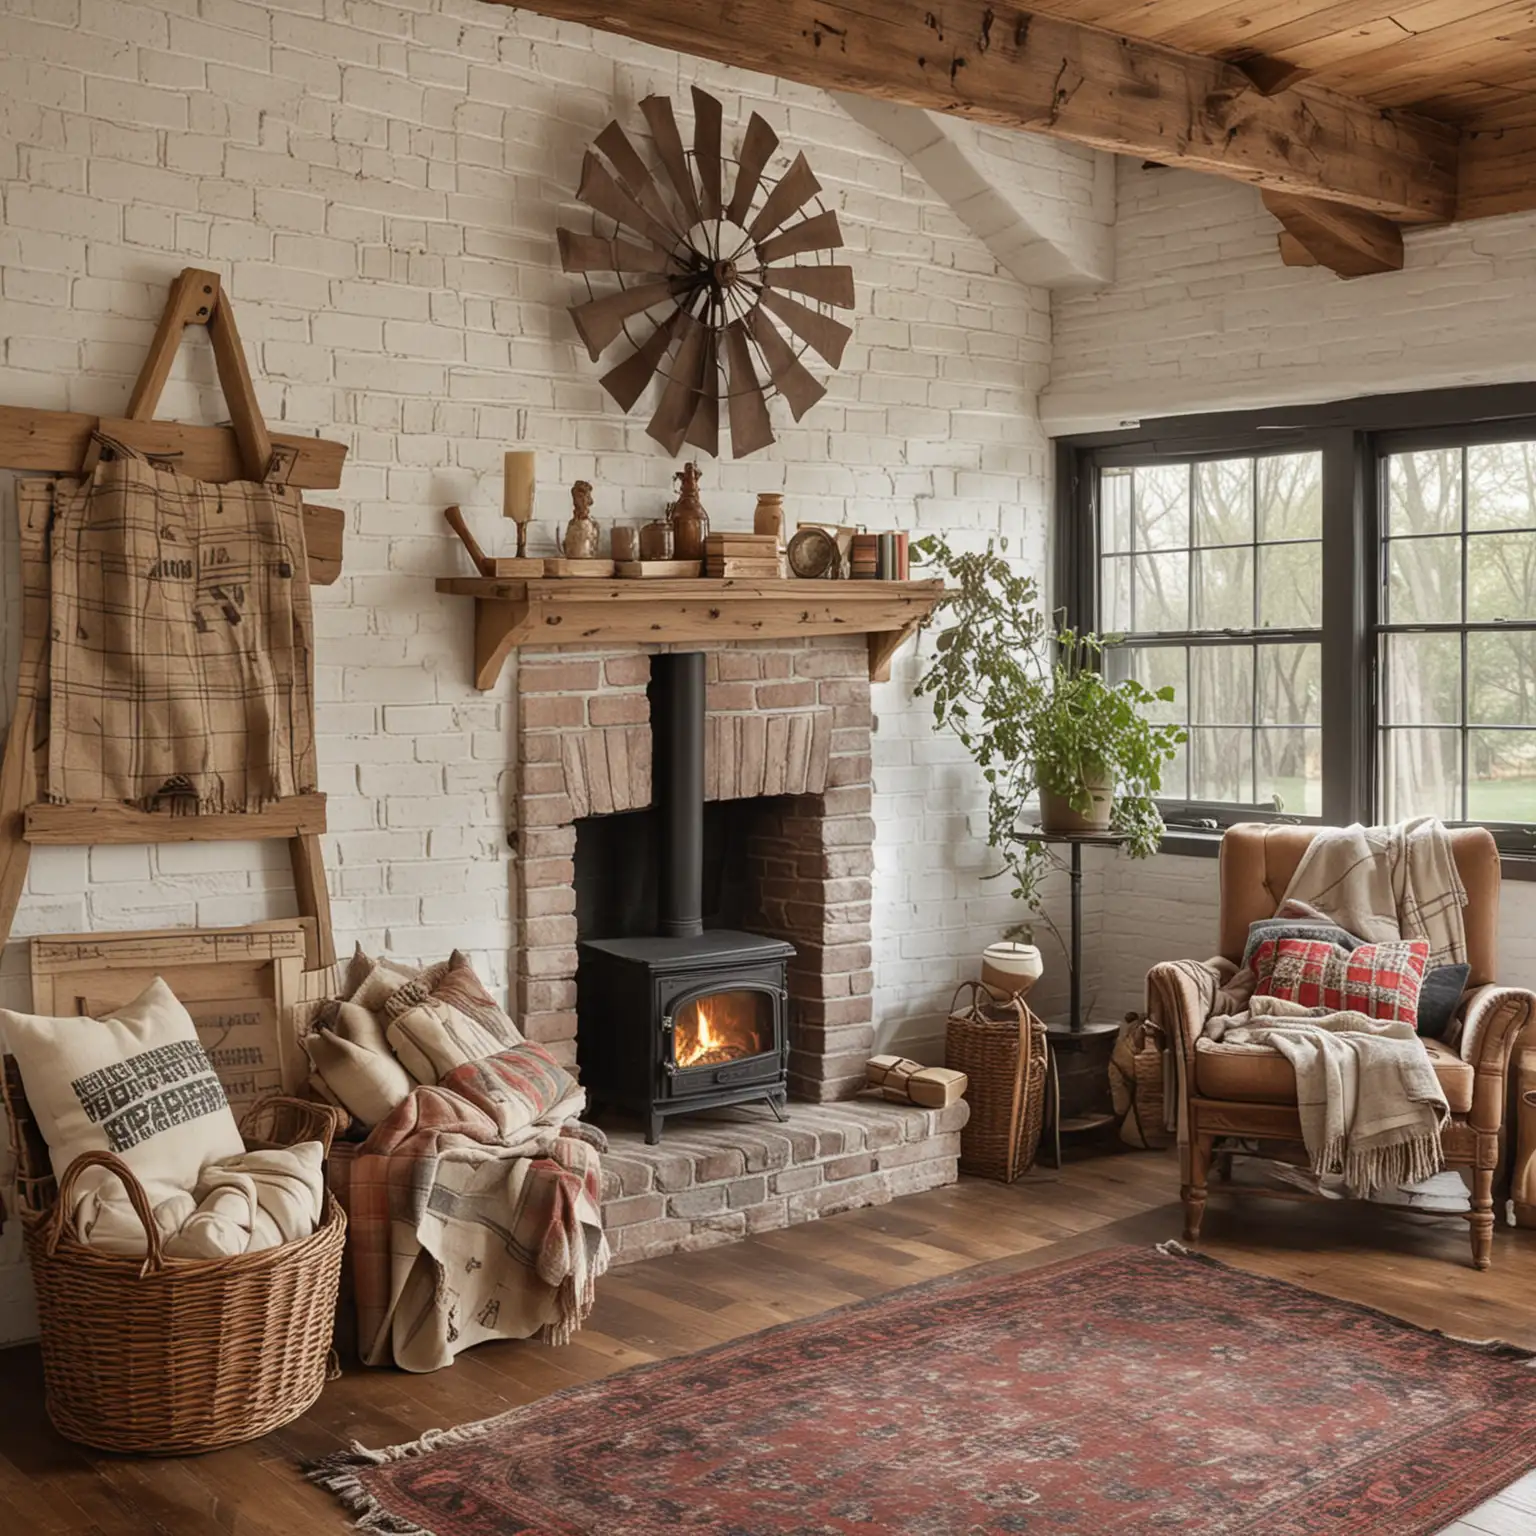 Rustic-Farmhouse-Living-Room-Cozy-Retreat-with-WoodBurning-Stove-and-Vintage-Decor